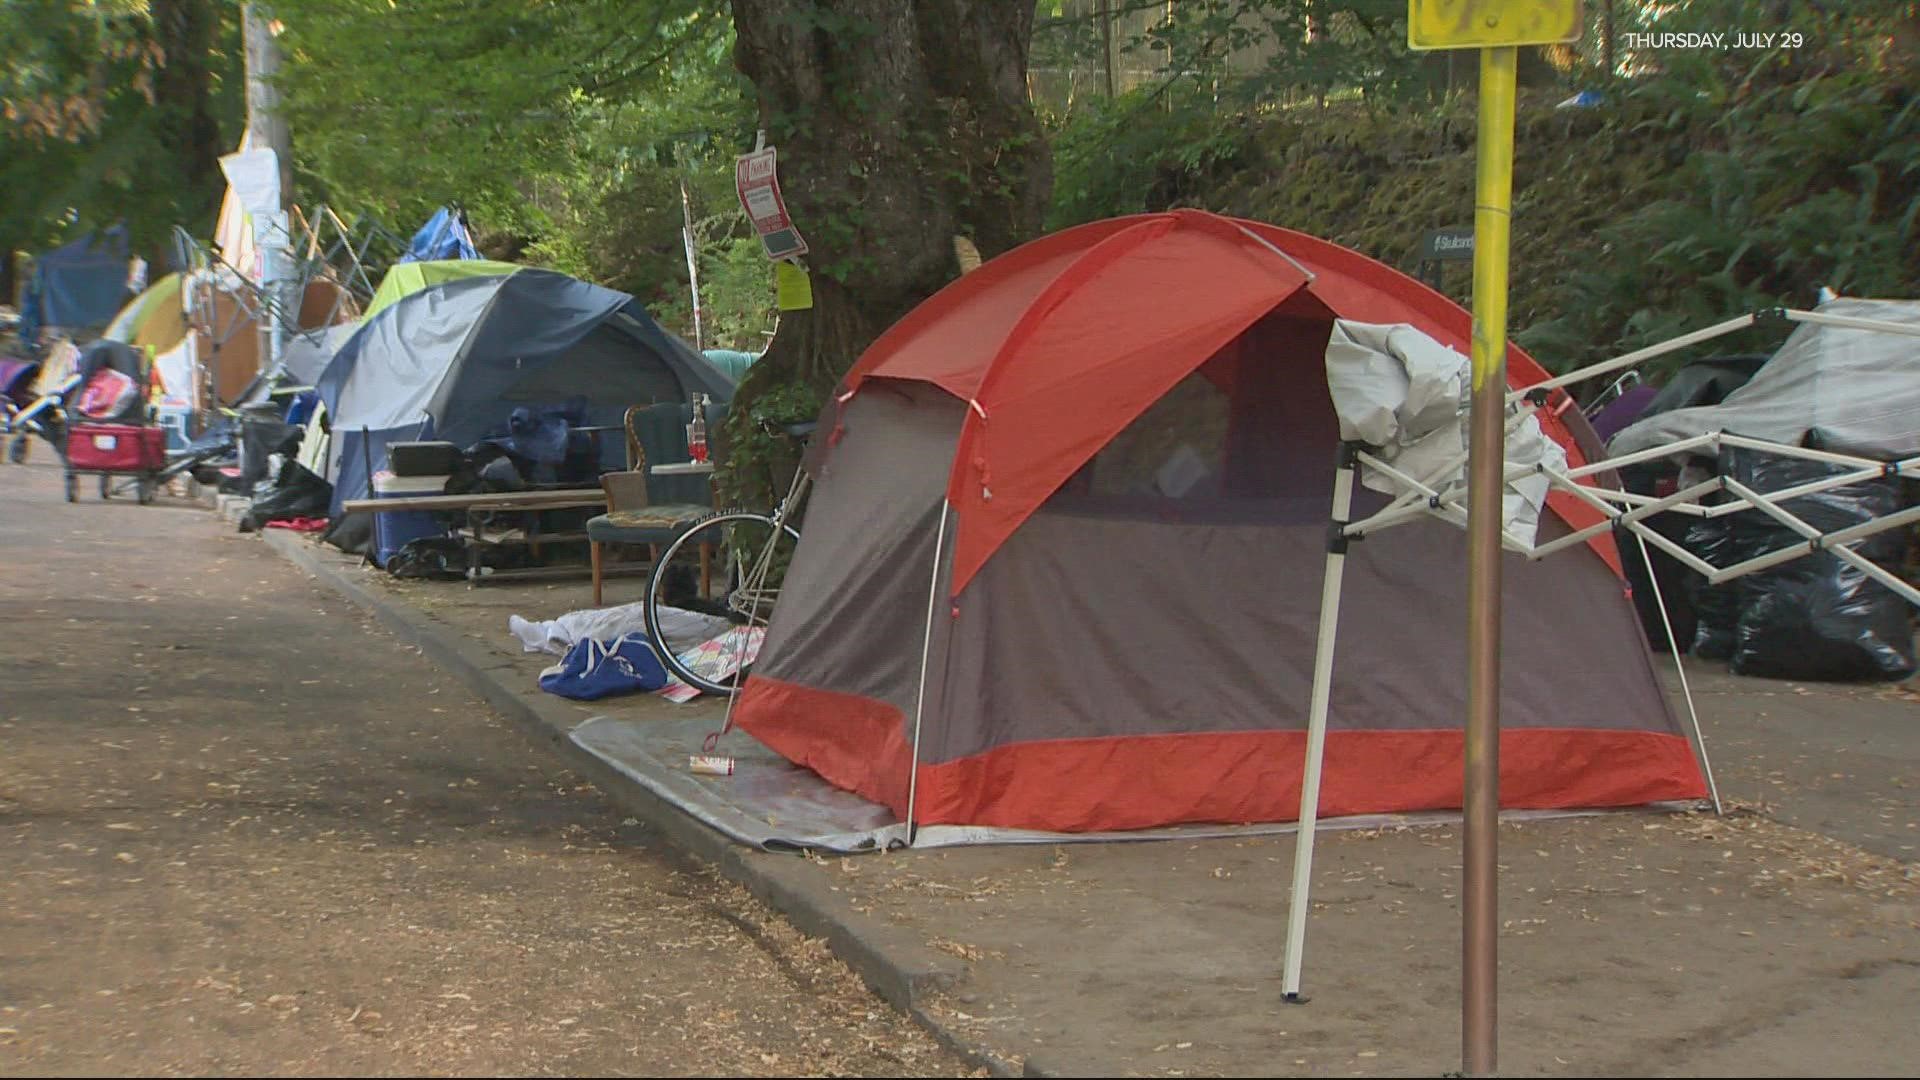 The city and county said they offered every person camping at Laurelhurst Park a shelter bed or free motel room, but most did not take them up on it.